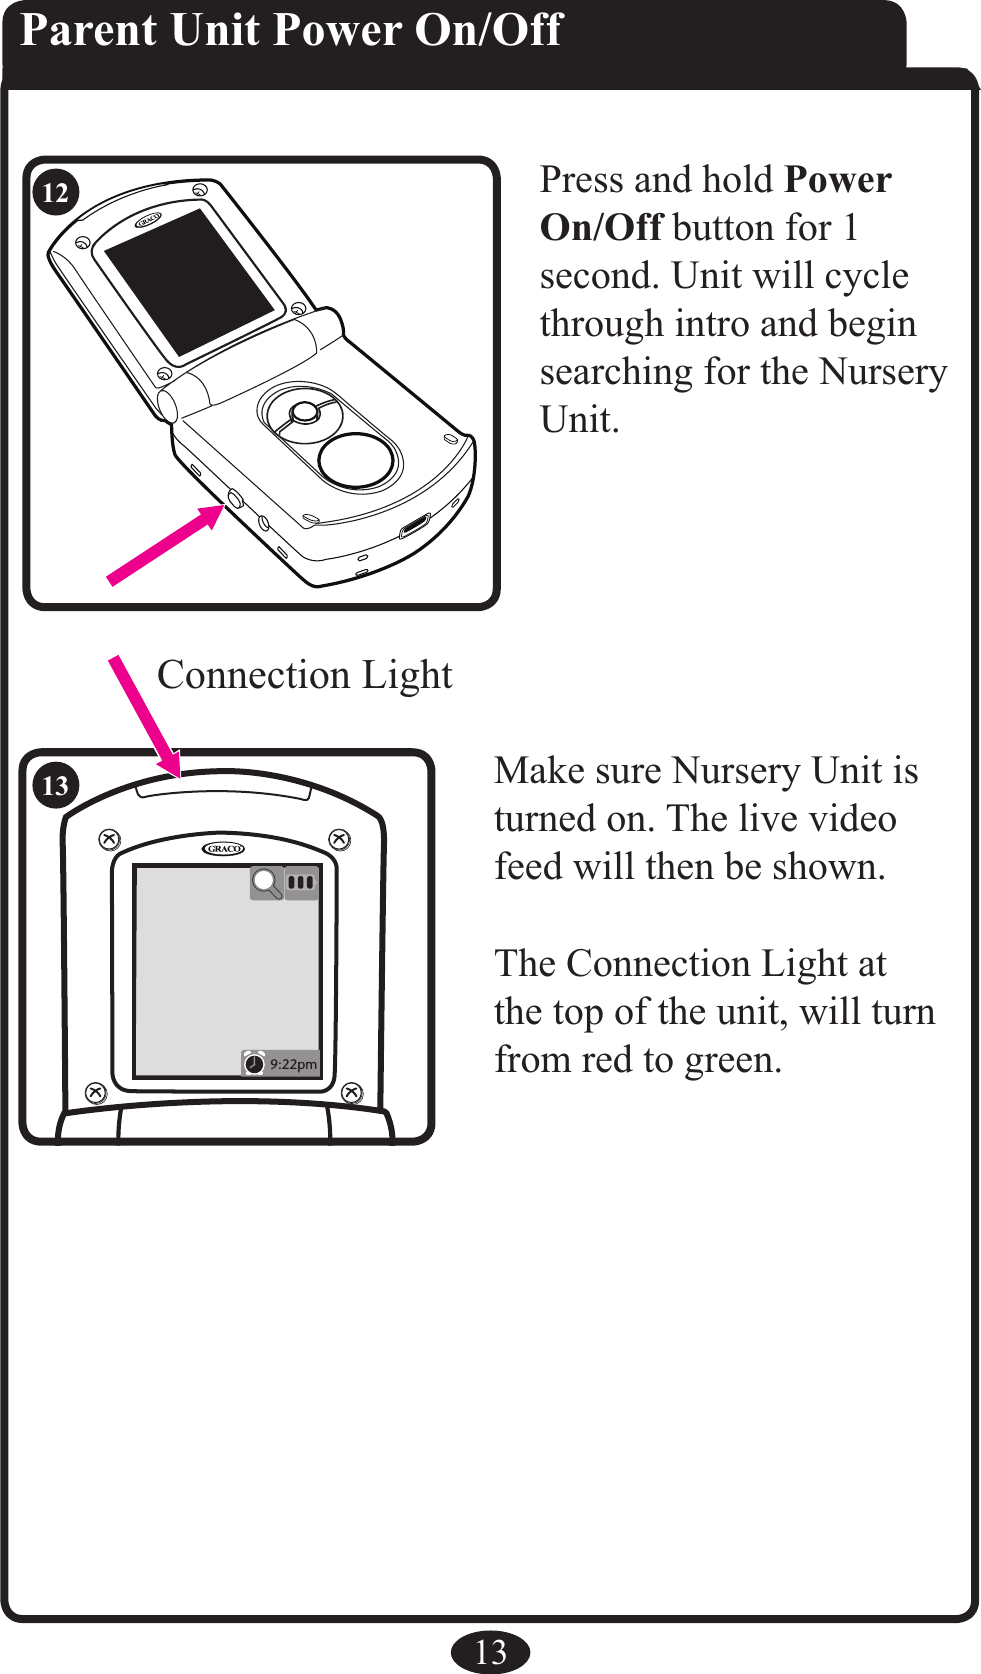 RR9:22pm13Parent Unit Power On/OffPress and hold Power On/Off button for 1 second. Unit will cycle through intro and begin searching for the Nursery Unit.Make sure Nursery Unit is turned on. The live video feed will then be shown.The Connection Light at the top of the unit, will turn from red to green.Connection Light1213